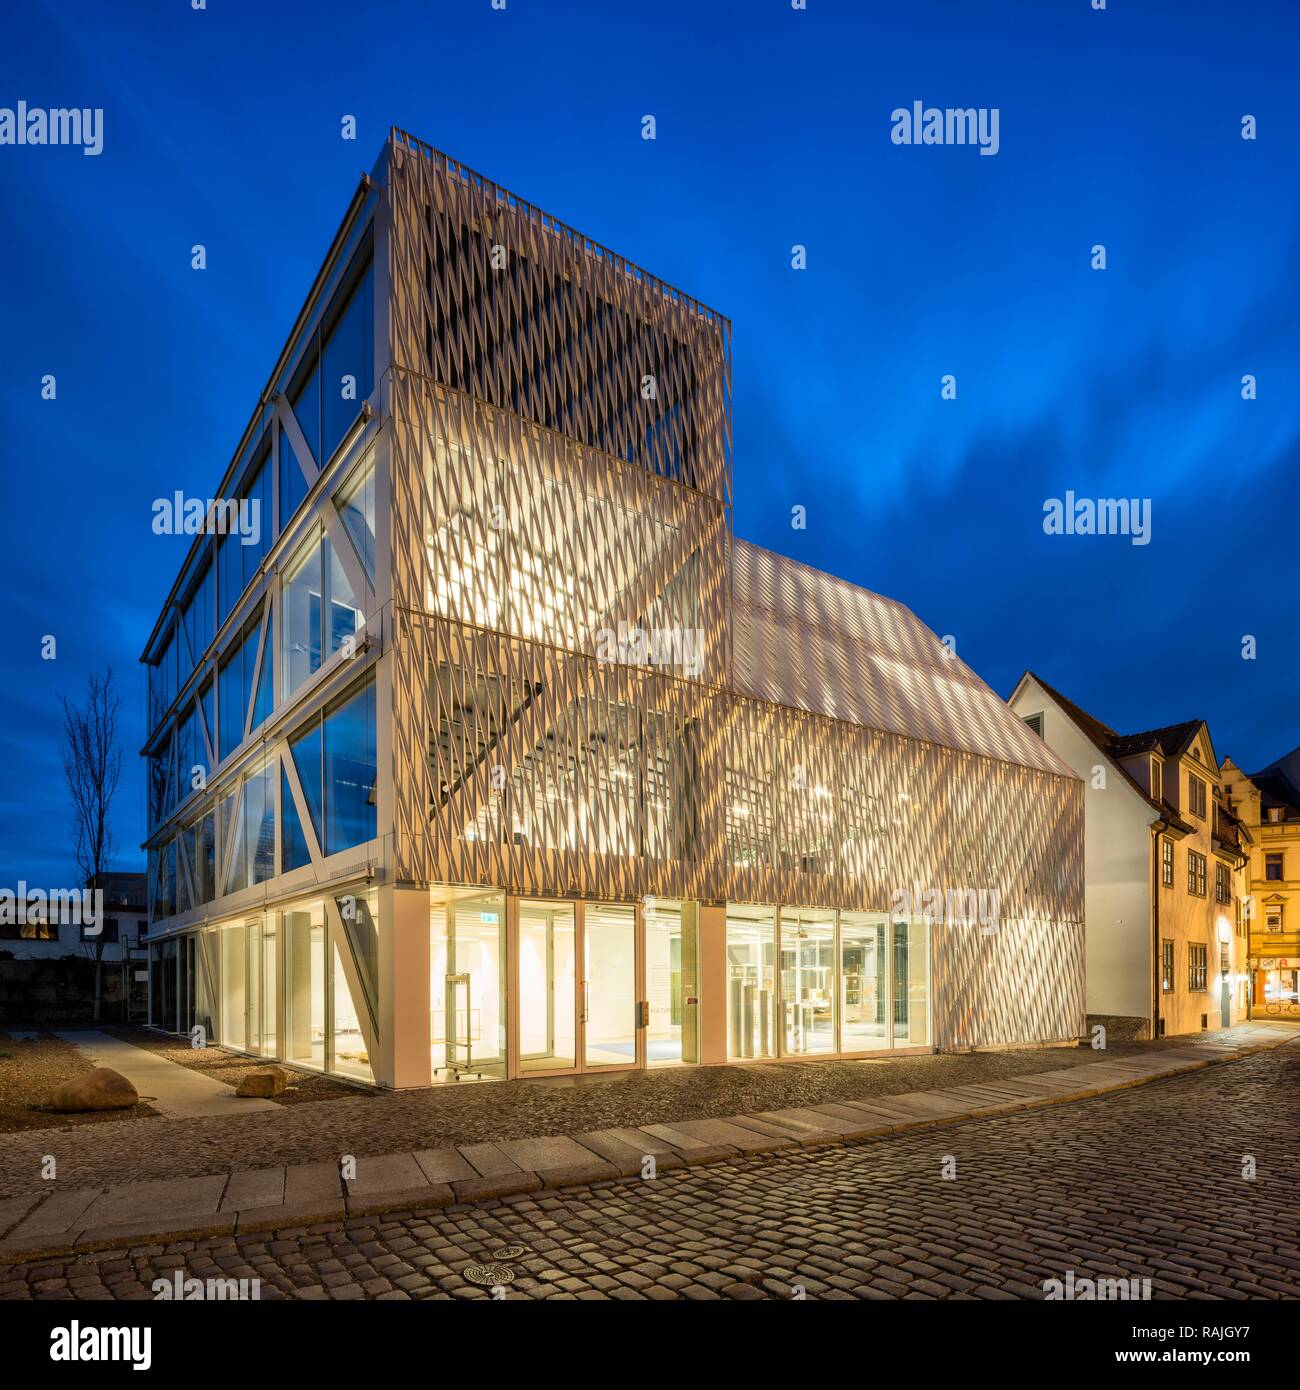 Illuminated Federal Cultural Foundation, at dusk, Halle an der Saale, Saxony-Anhalt, Germany Stock Photo